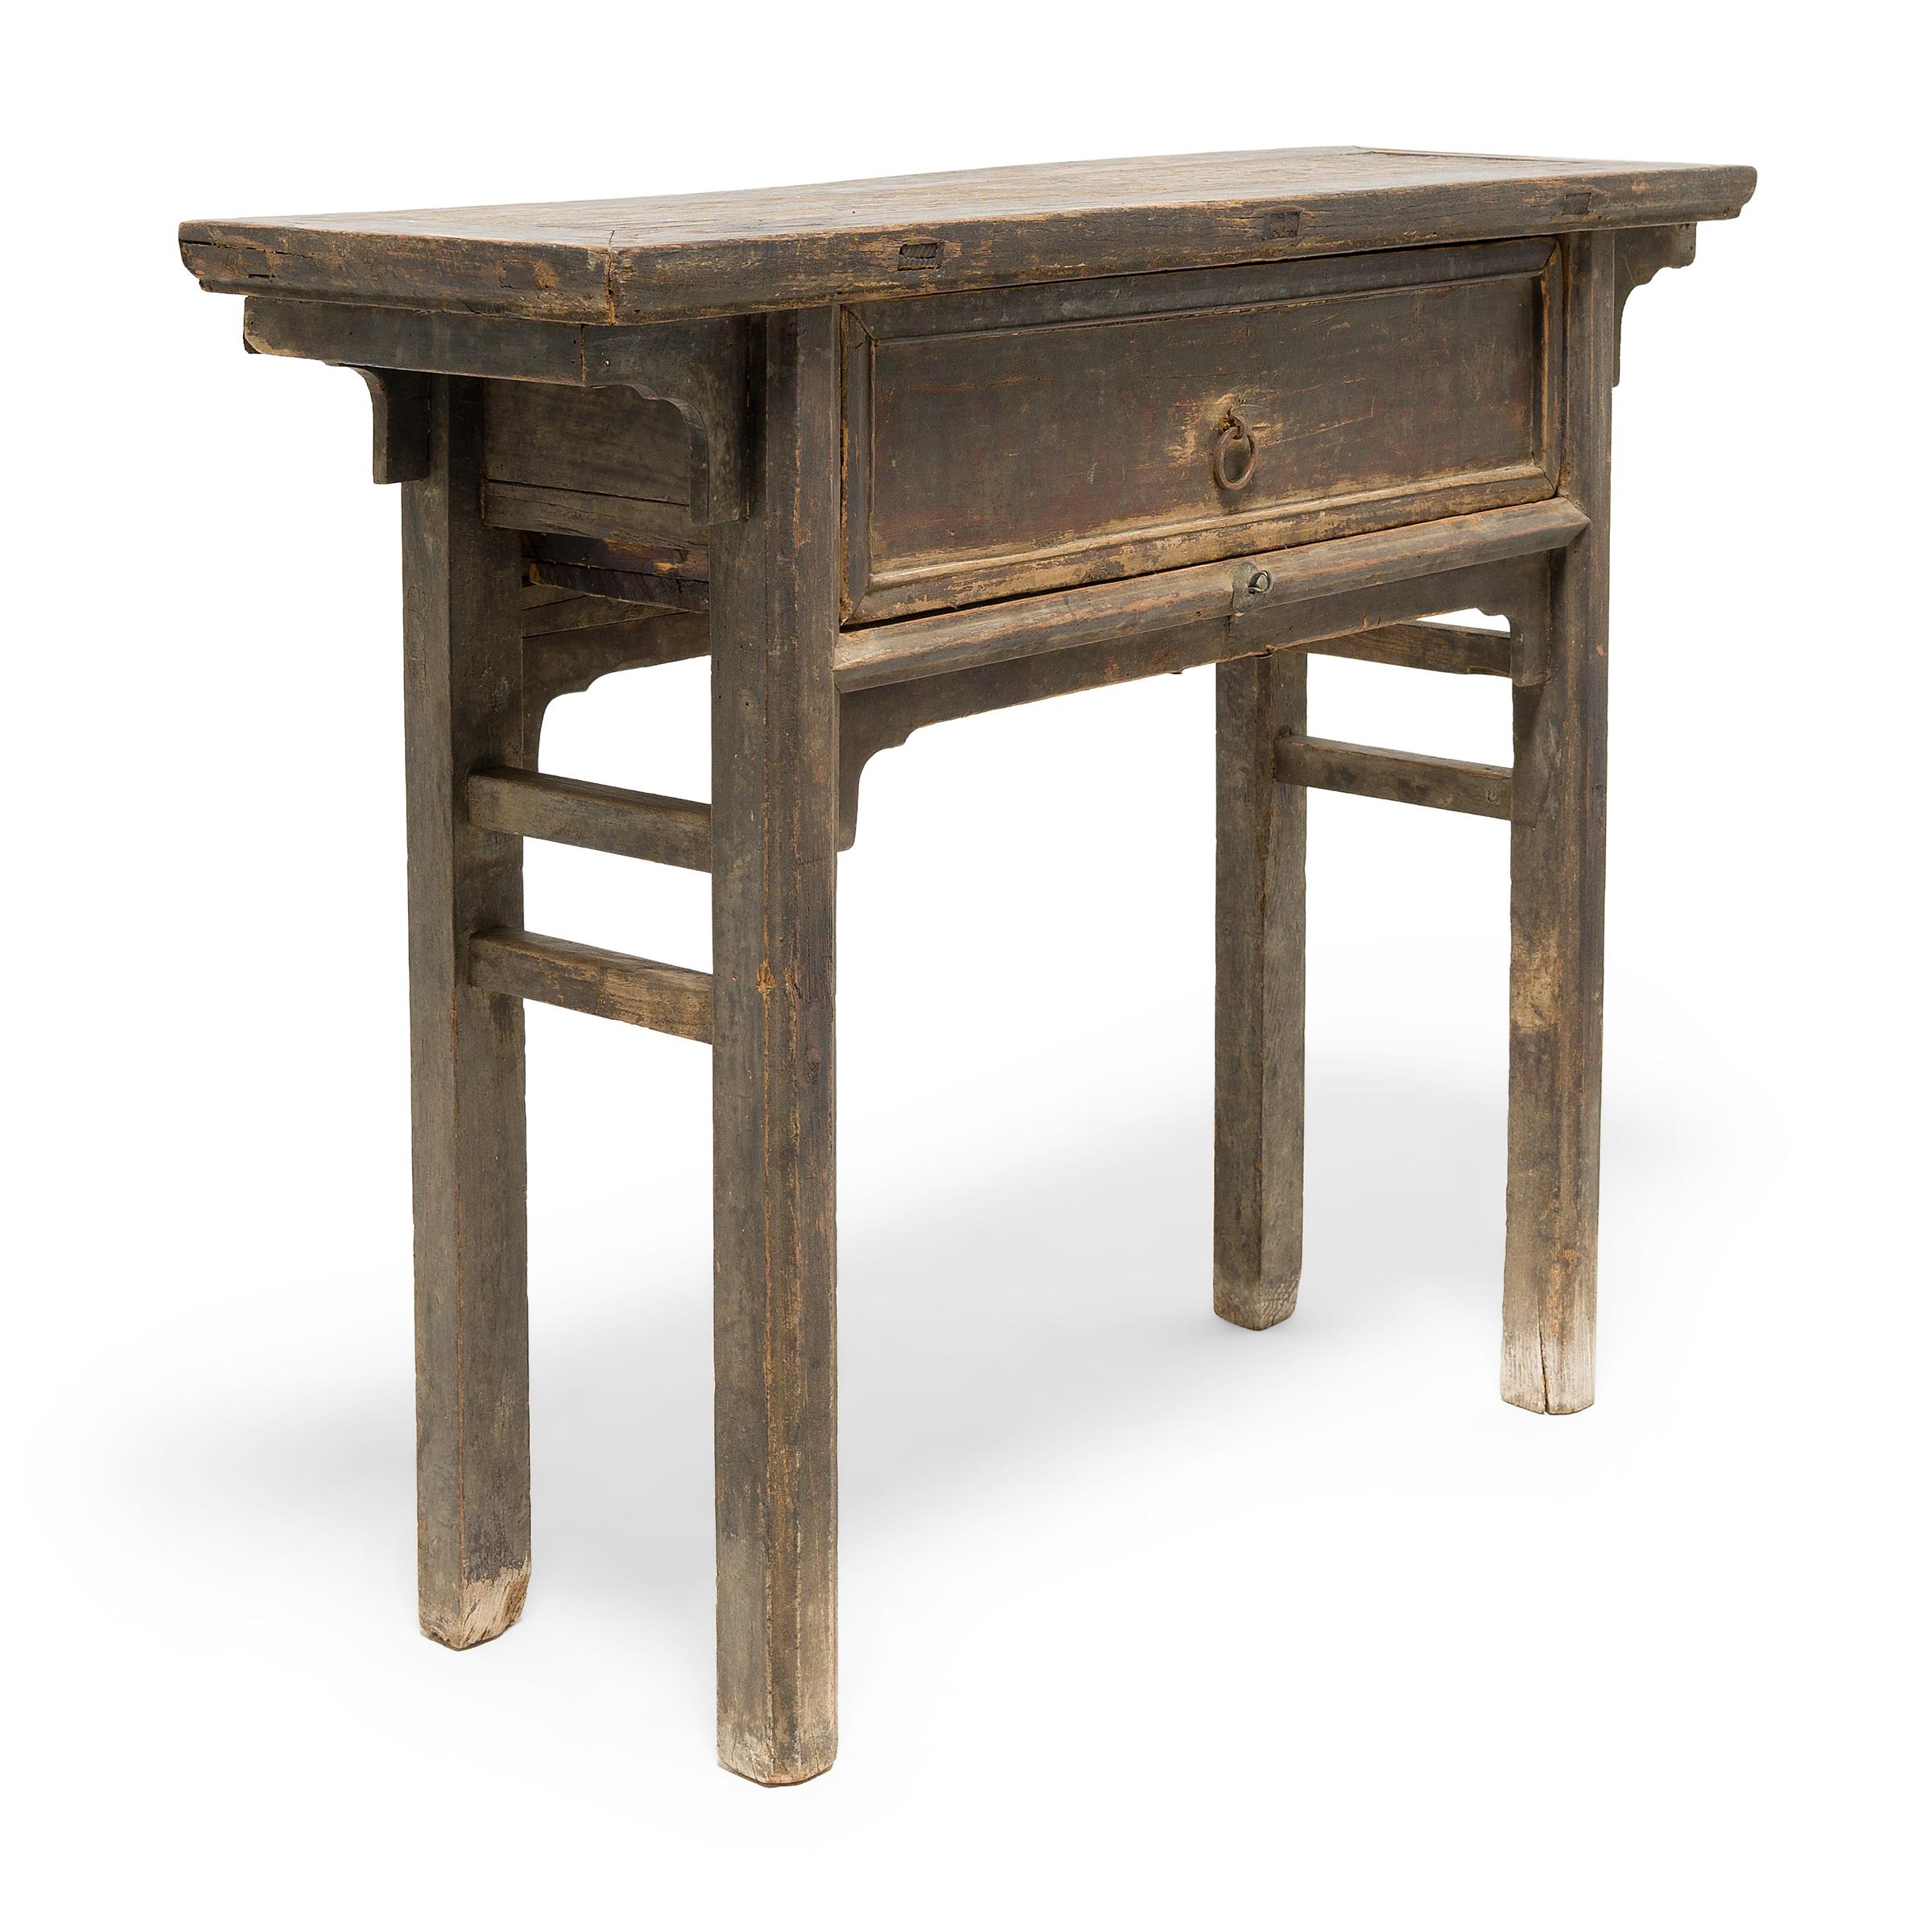 Chinese Shallow Offering Table, c. 1800 In Good Condition For Sale In Chicago, IL